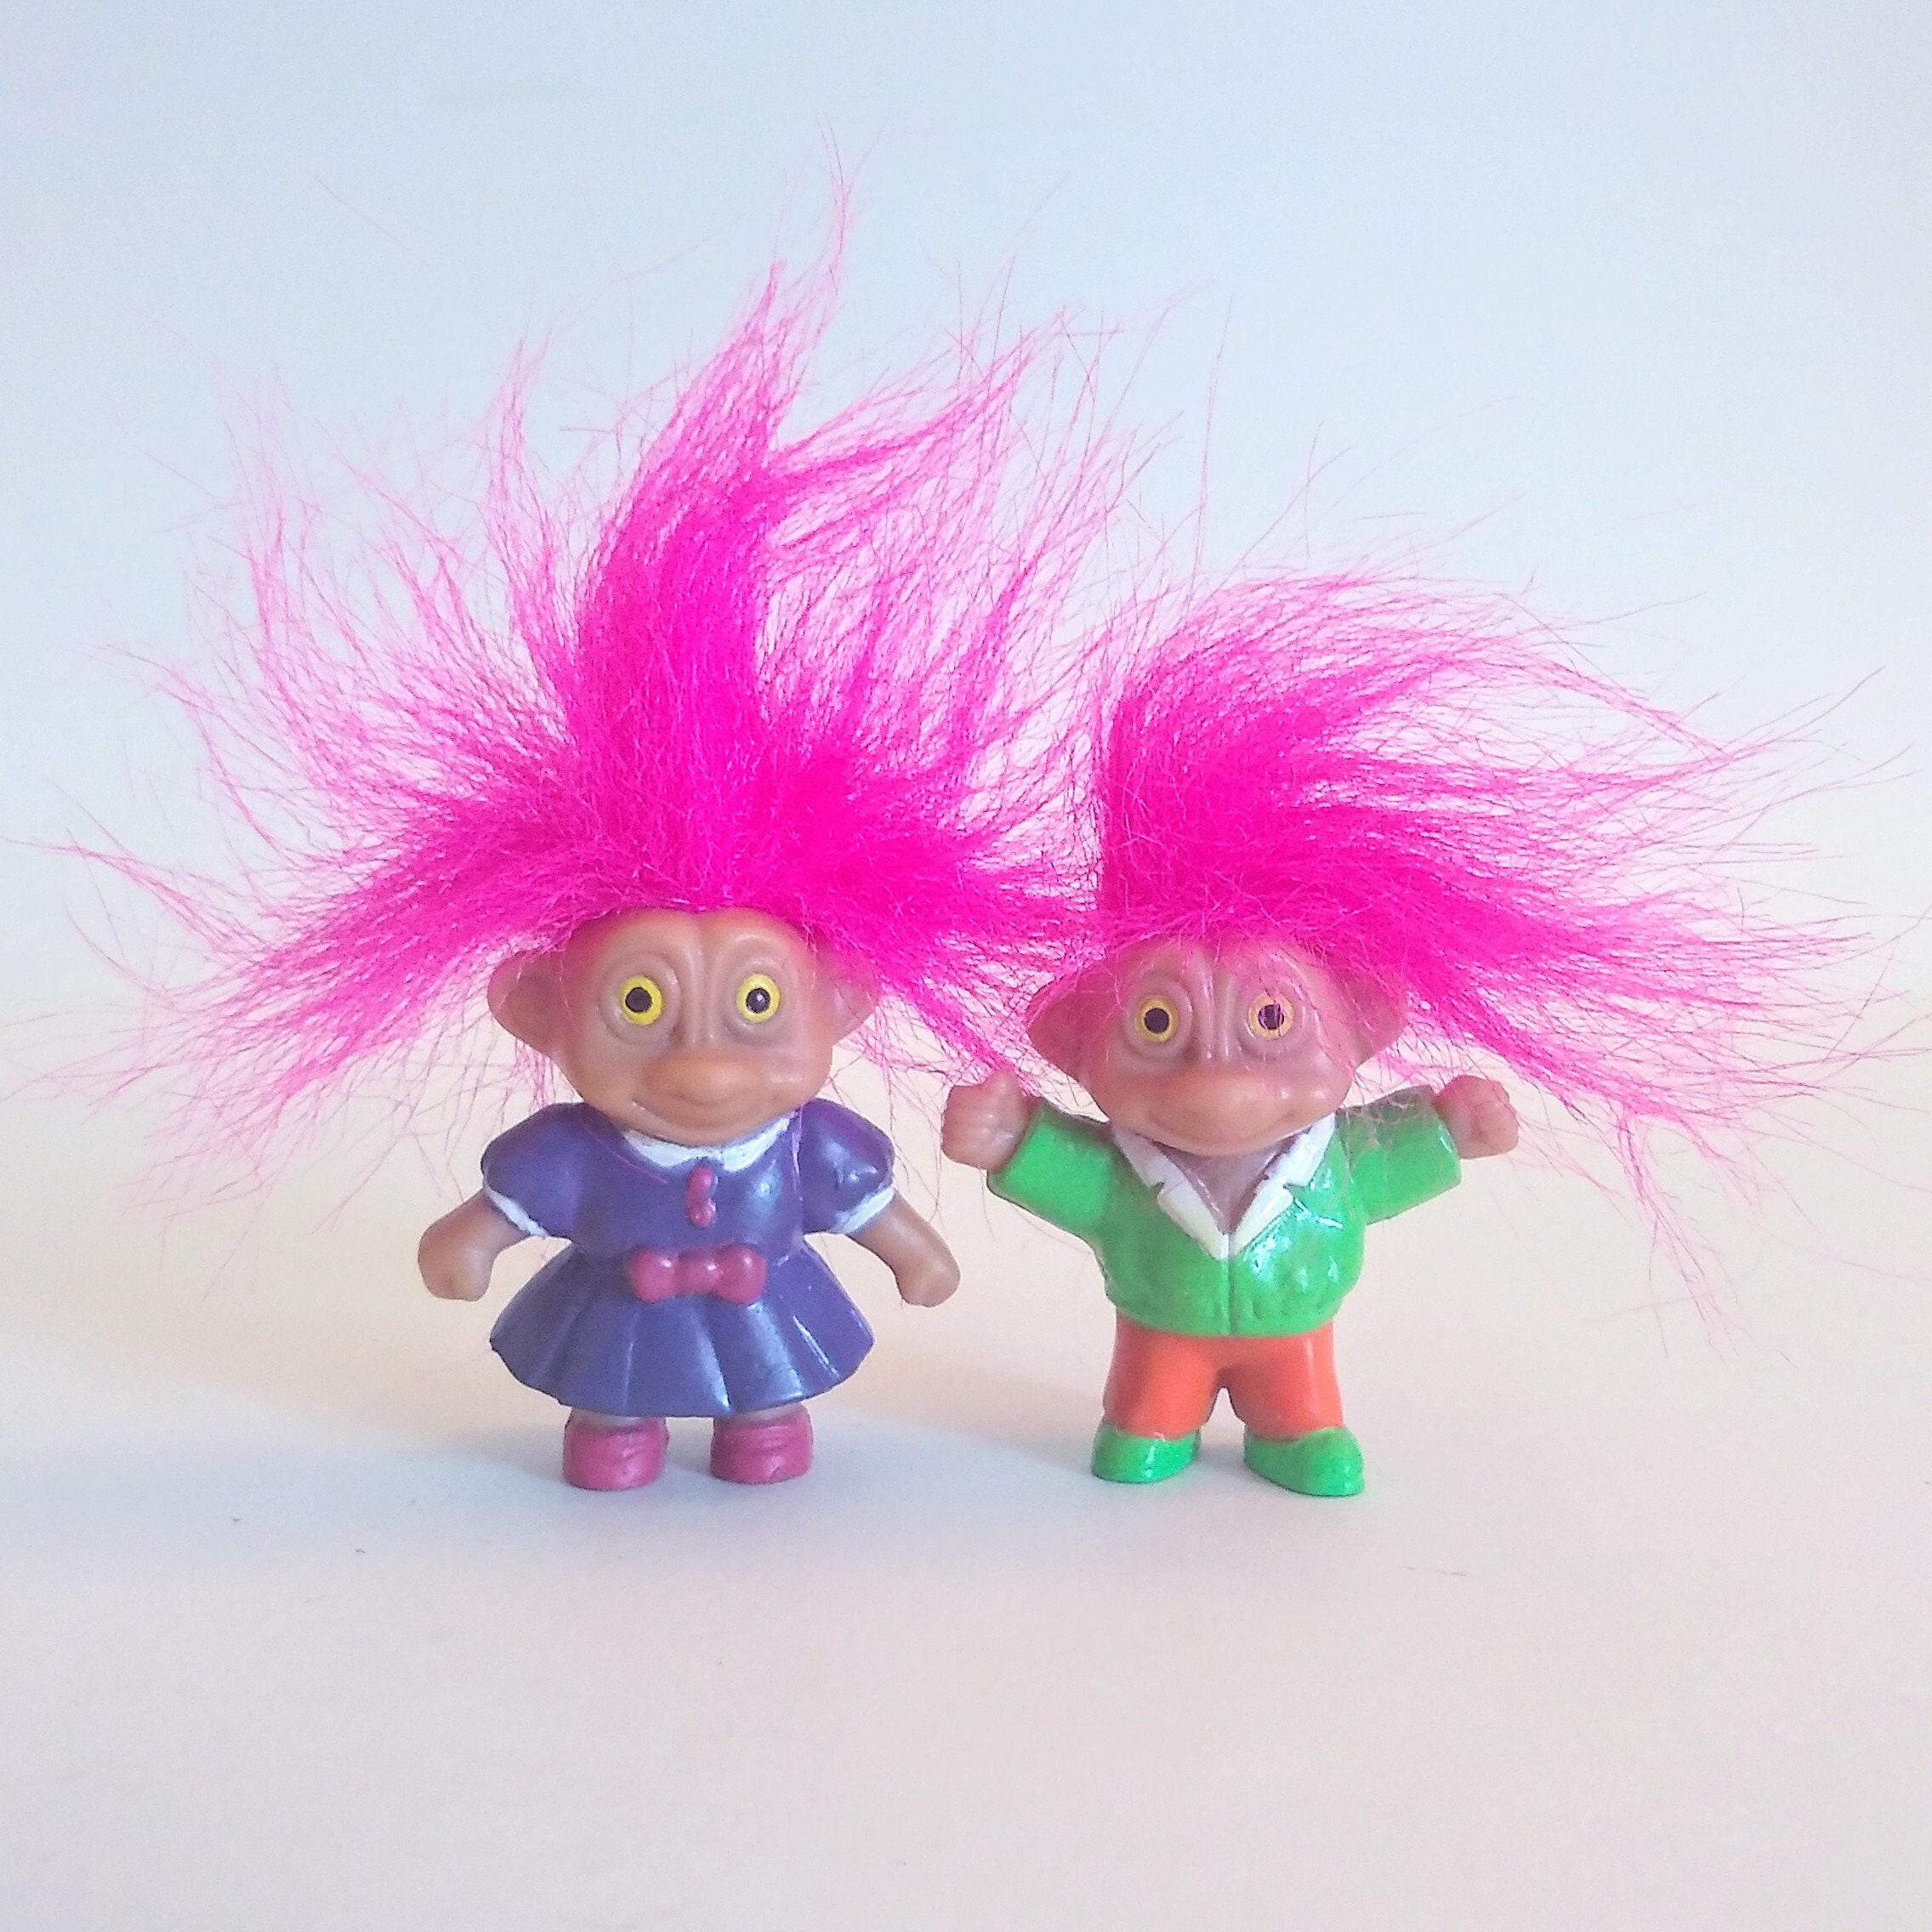 Troll Doll Png Sublimation Design, Hand Drawn Trol Doll Png, Troll Doll Png  Design, Troll Doll Clipart, 90's Troll Png, Digital Download